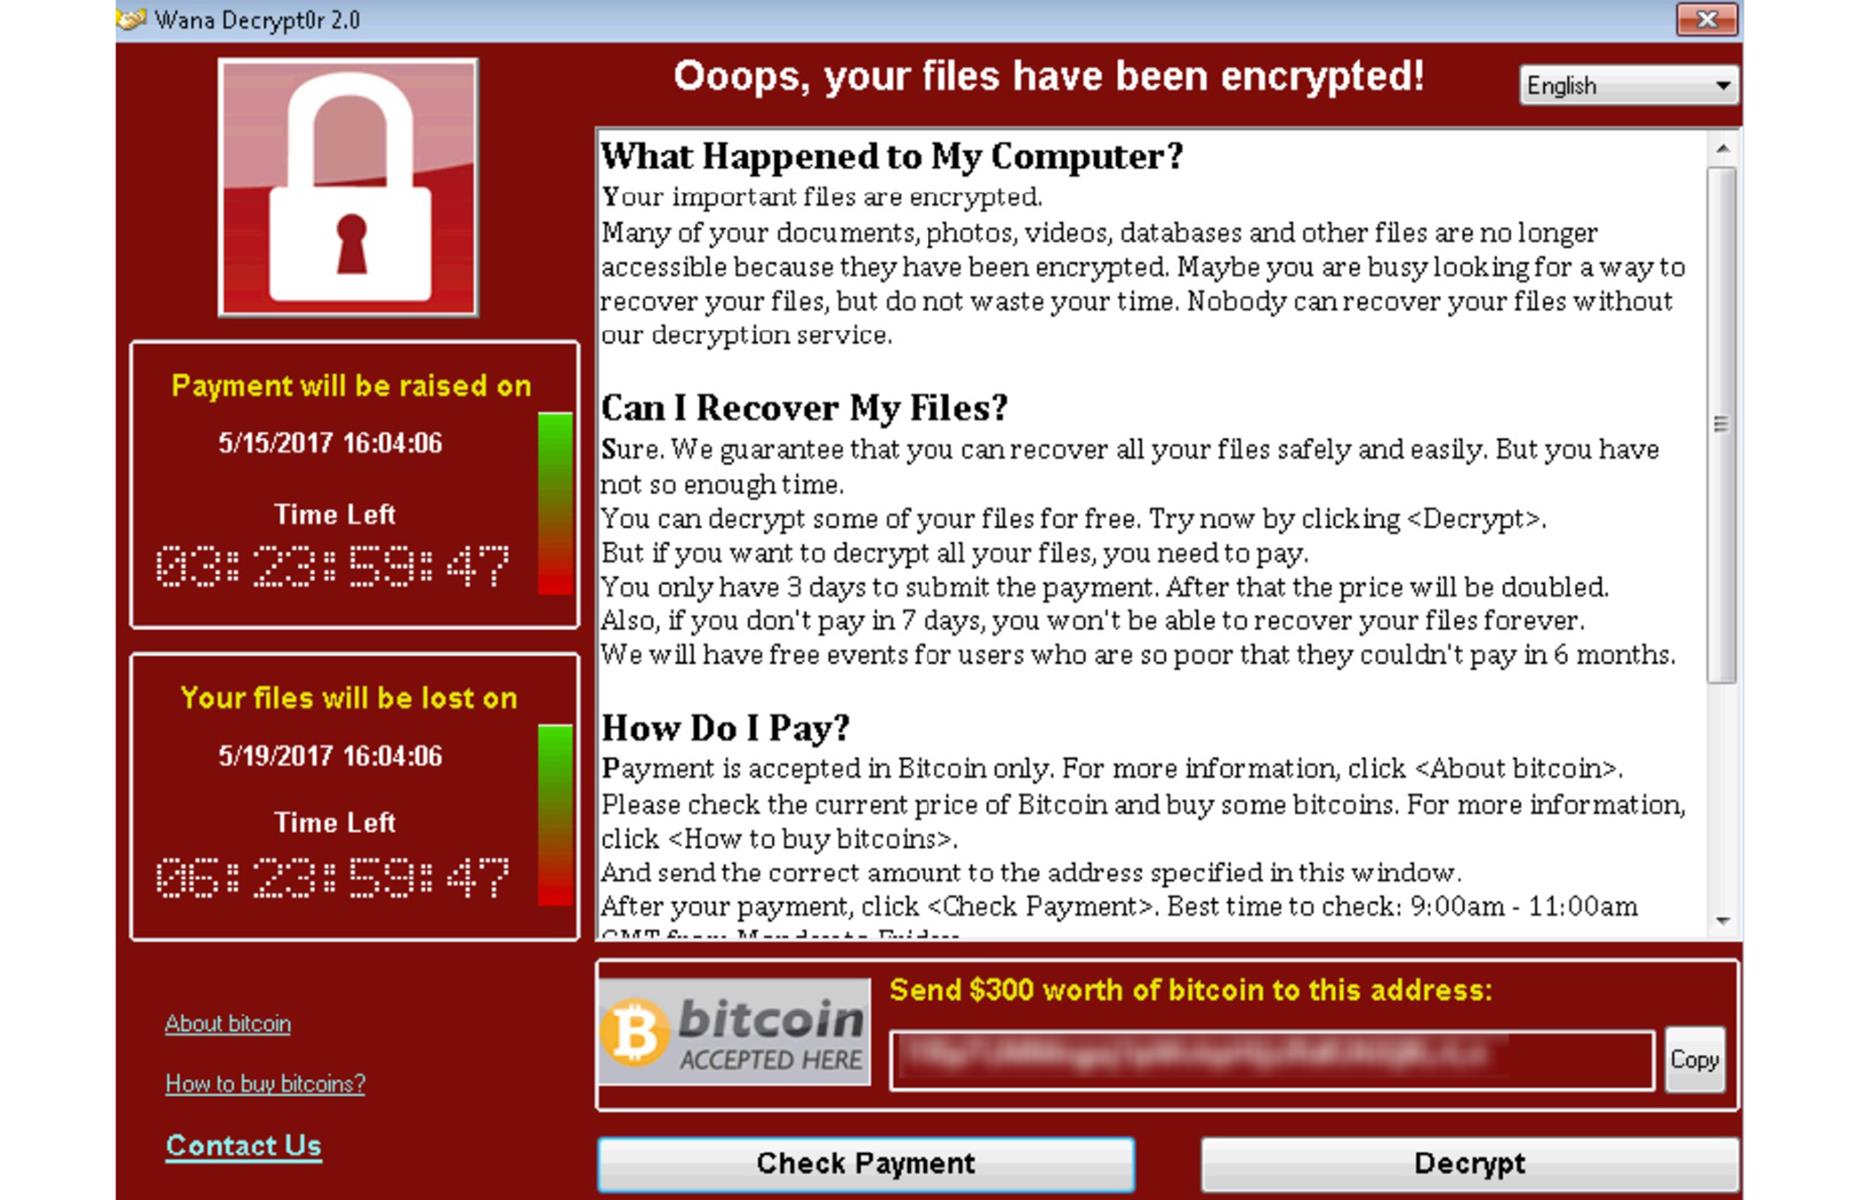 The scam: ransomware attacks